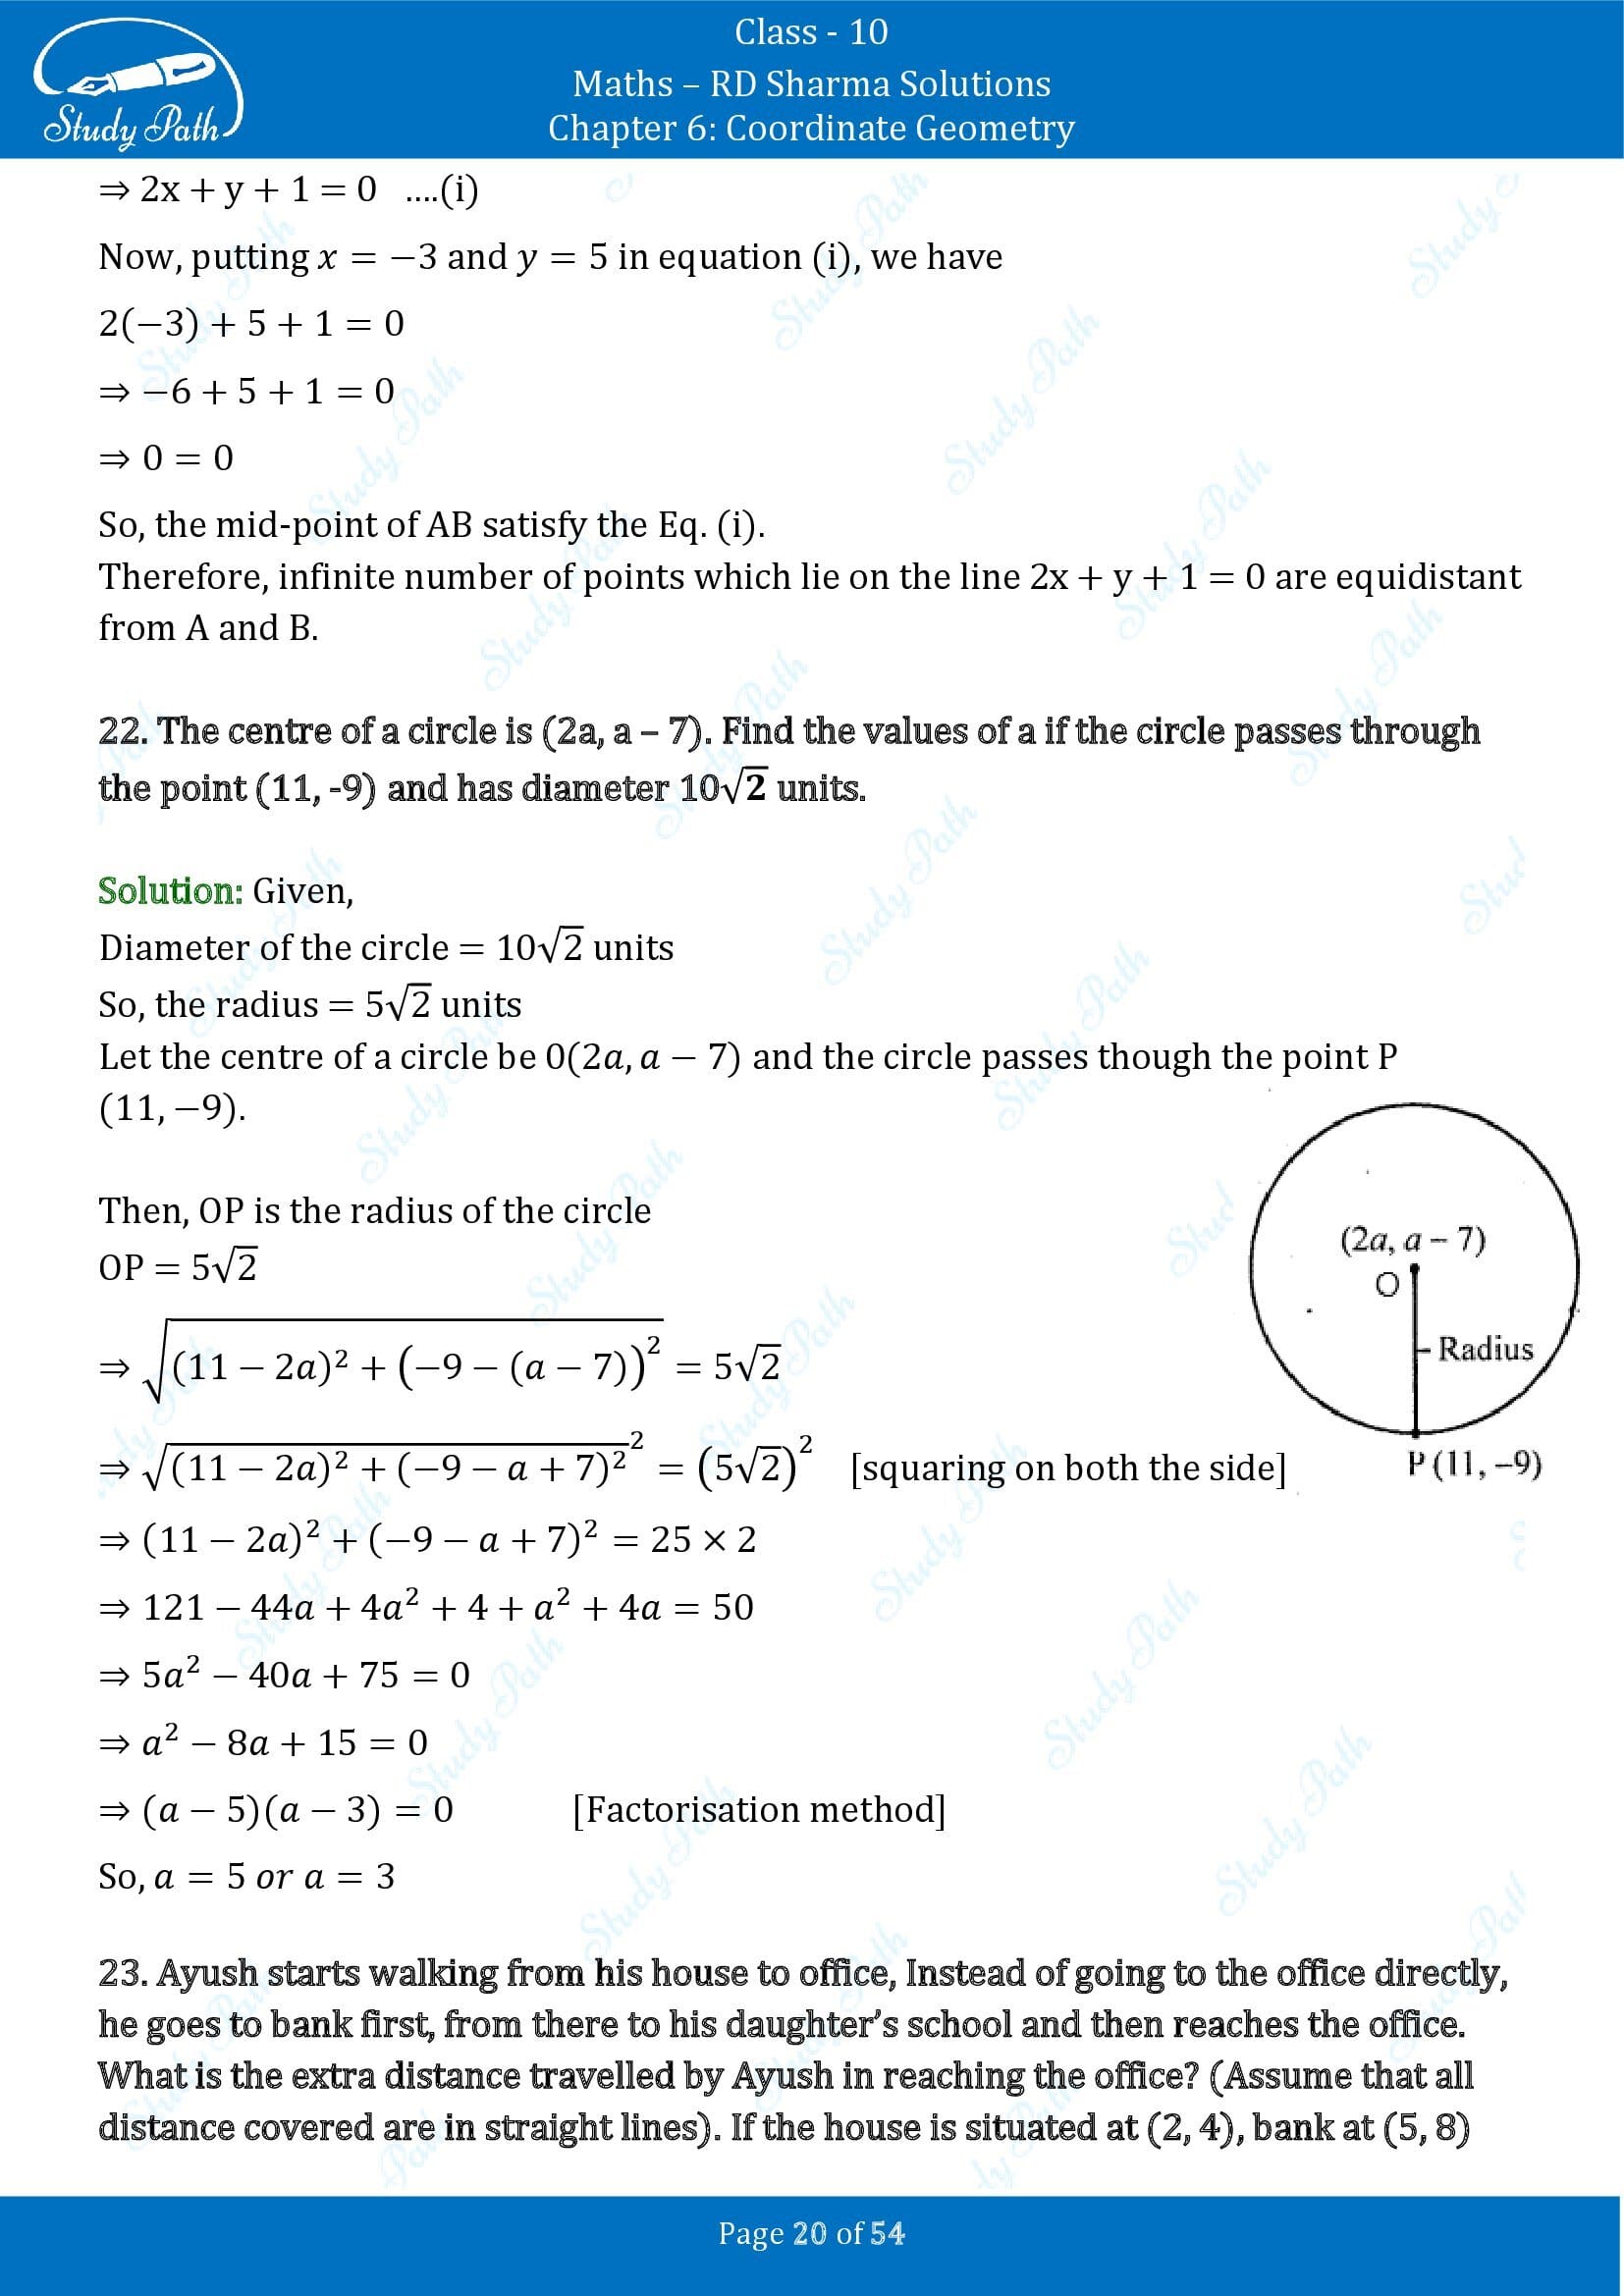 RD Sharma Solutions Class 10 Chapter 6 Coordinate Geometry Exercise 6.2 0020